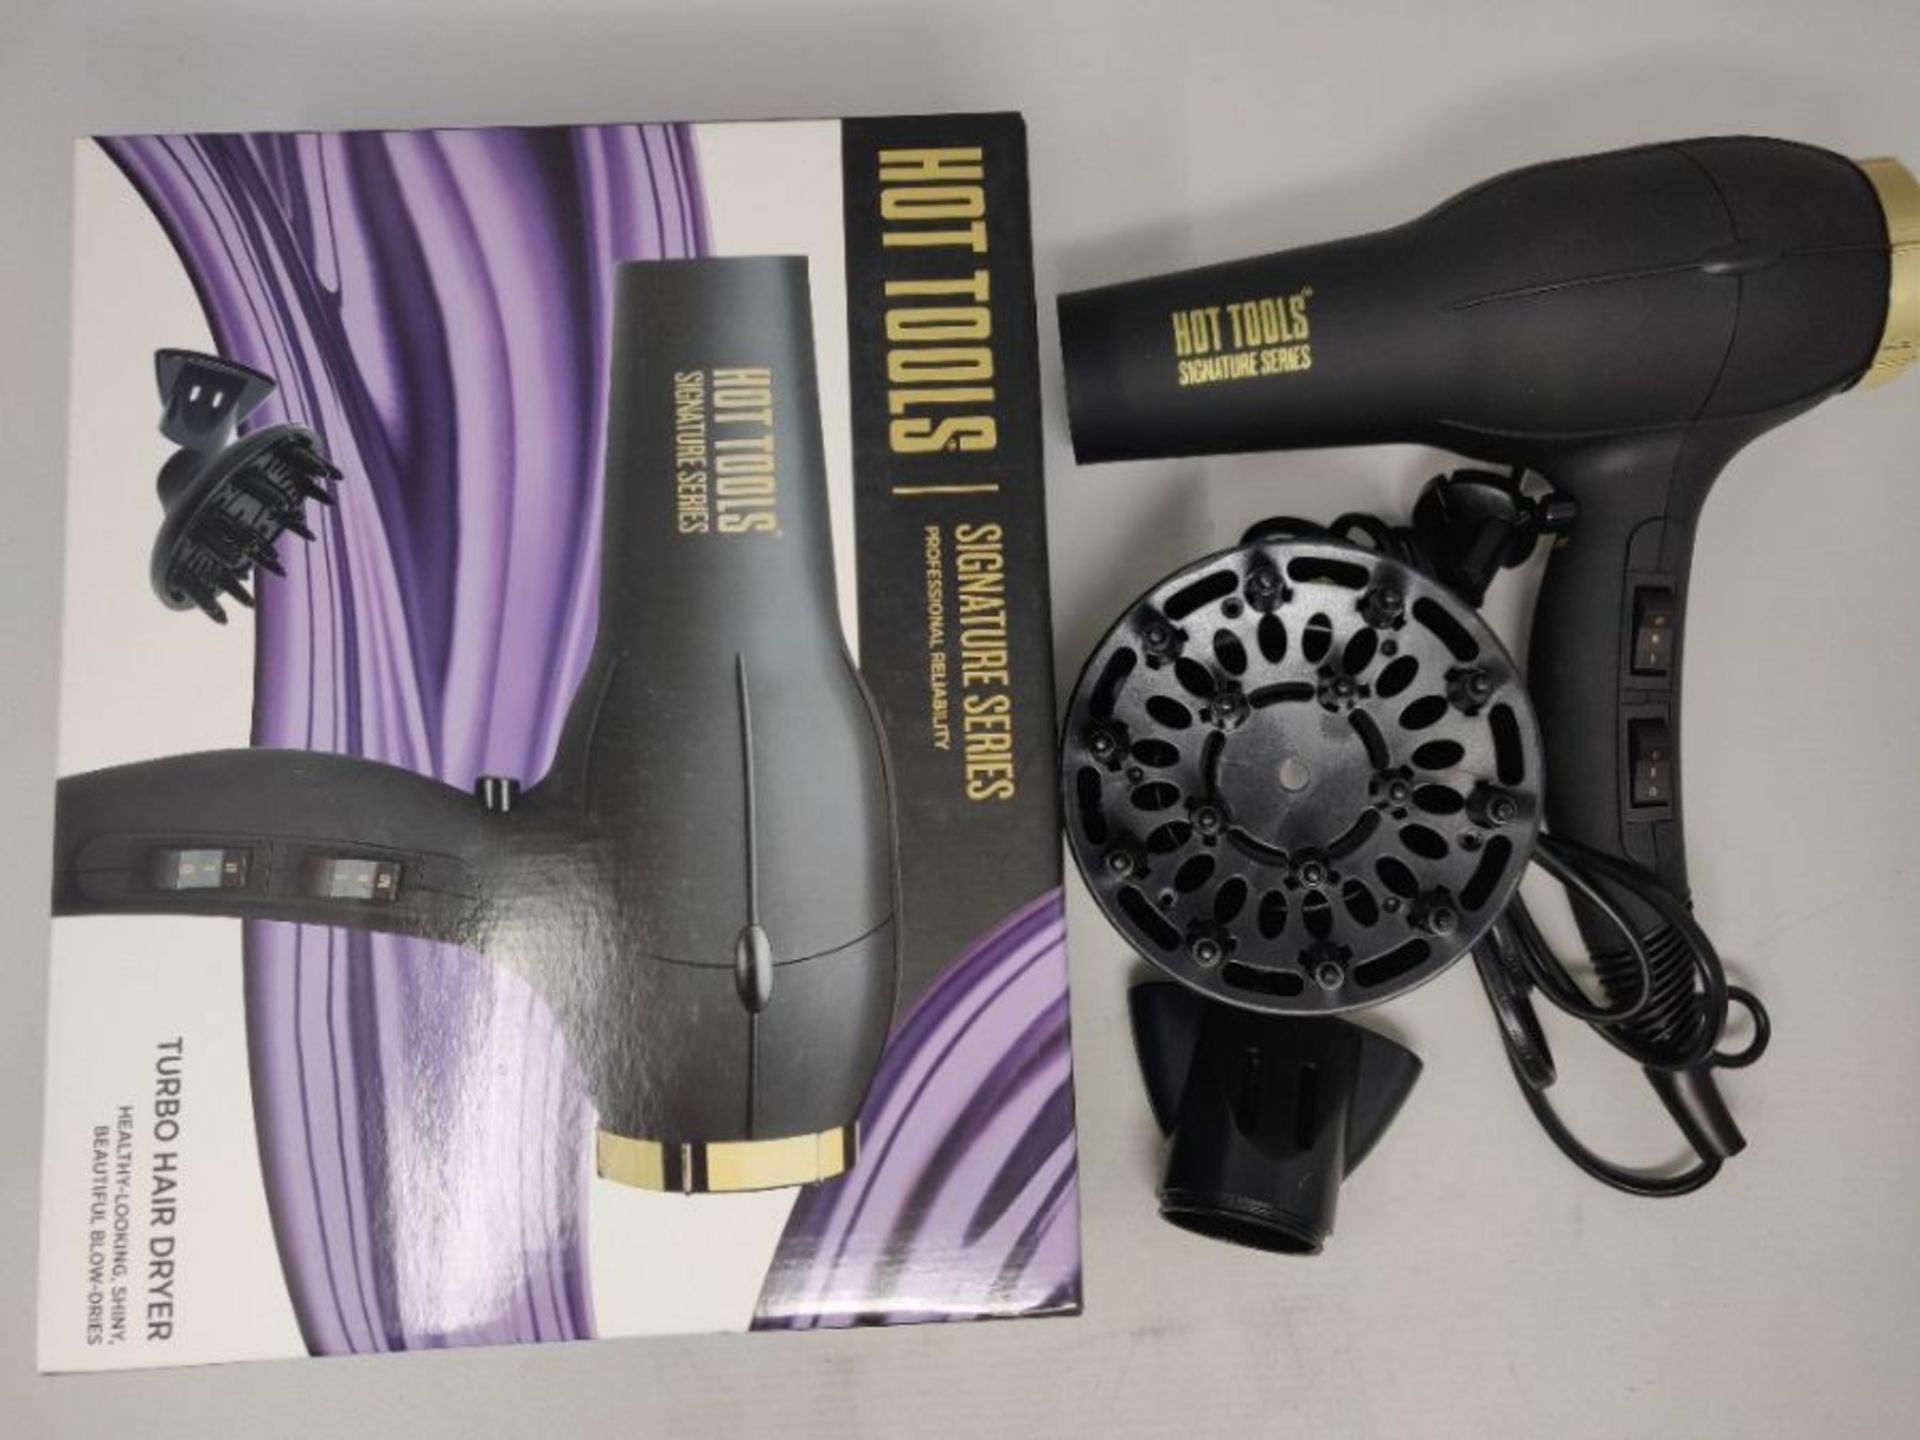 Hot Tools Signature Series 1875W Turbo Ionic Dryer (Ionic Technology; 3 Heat/2 Speed; - Image 2 of 2